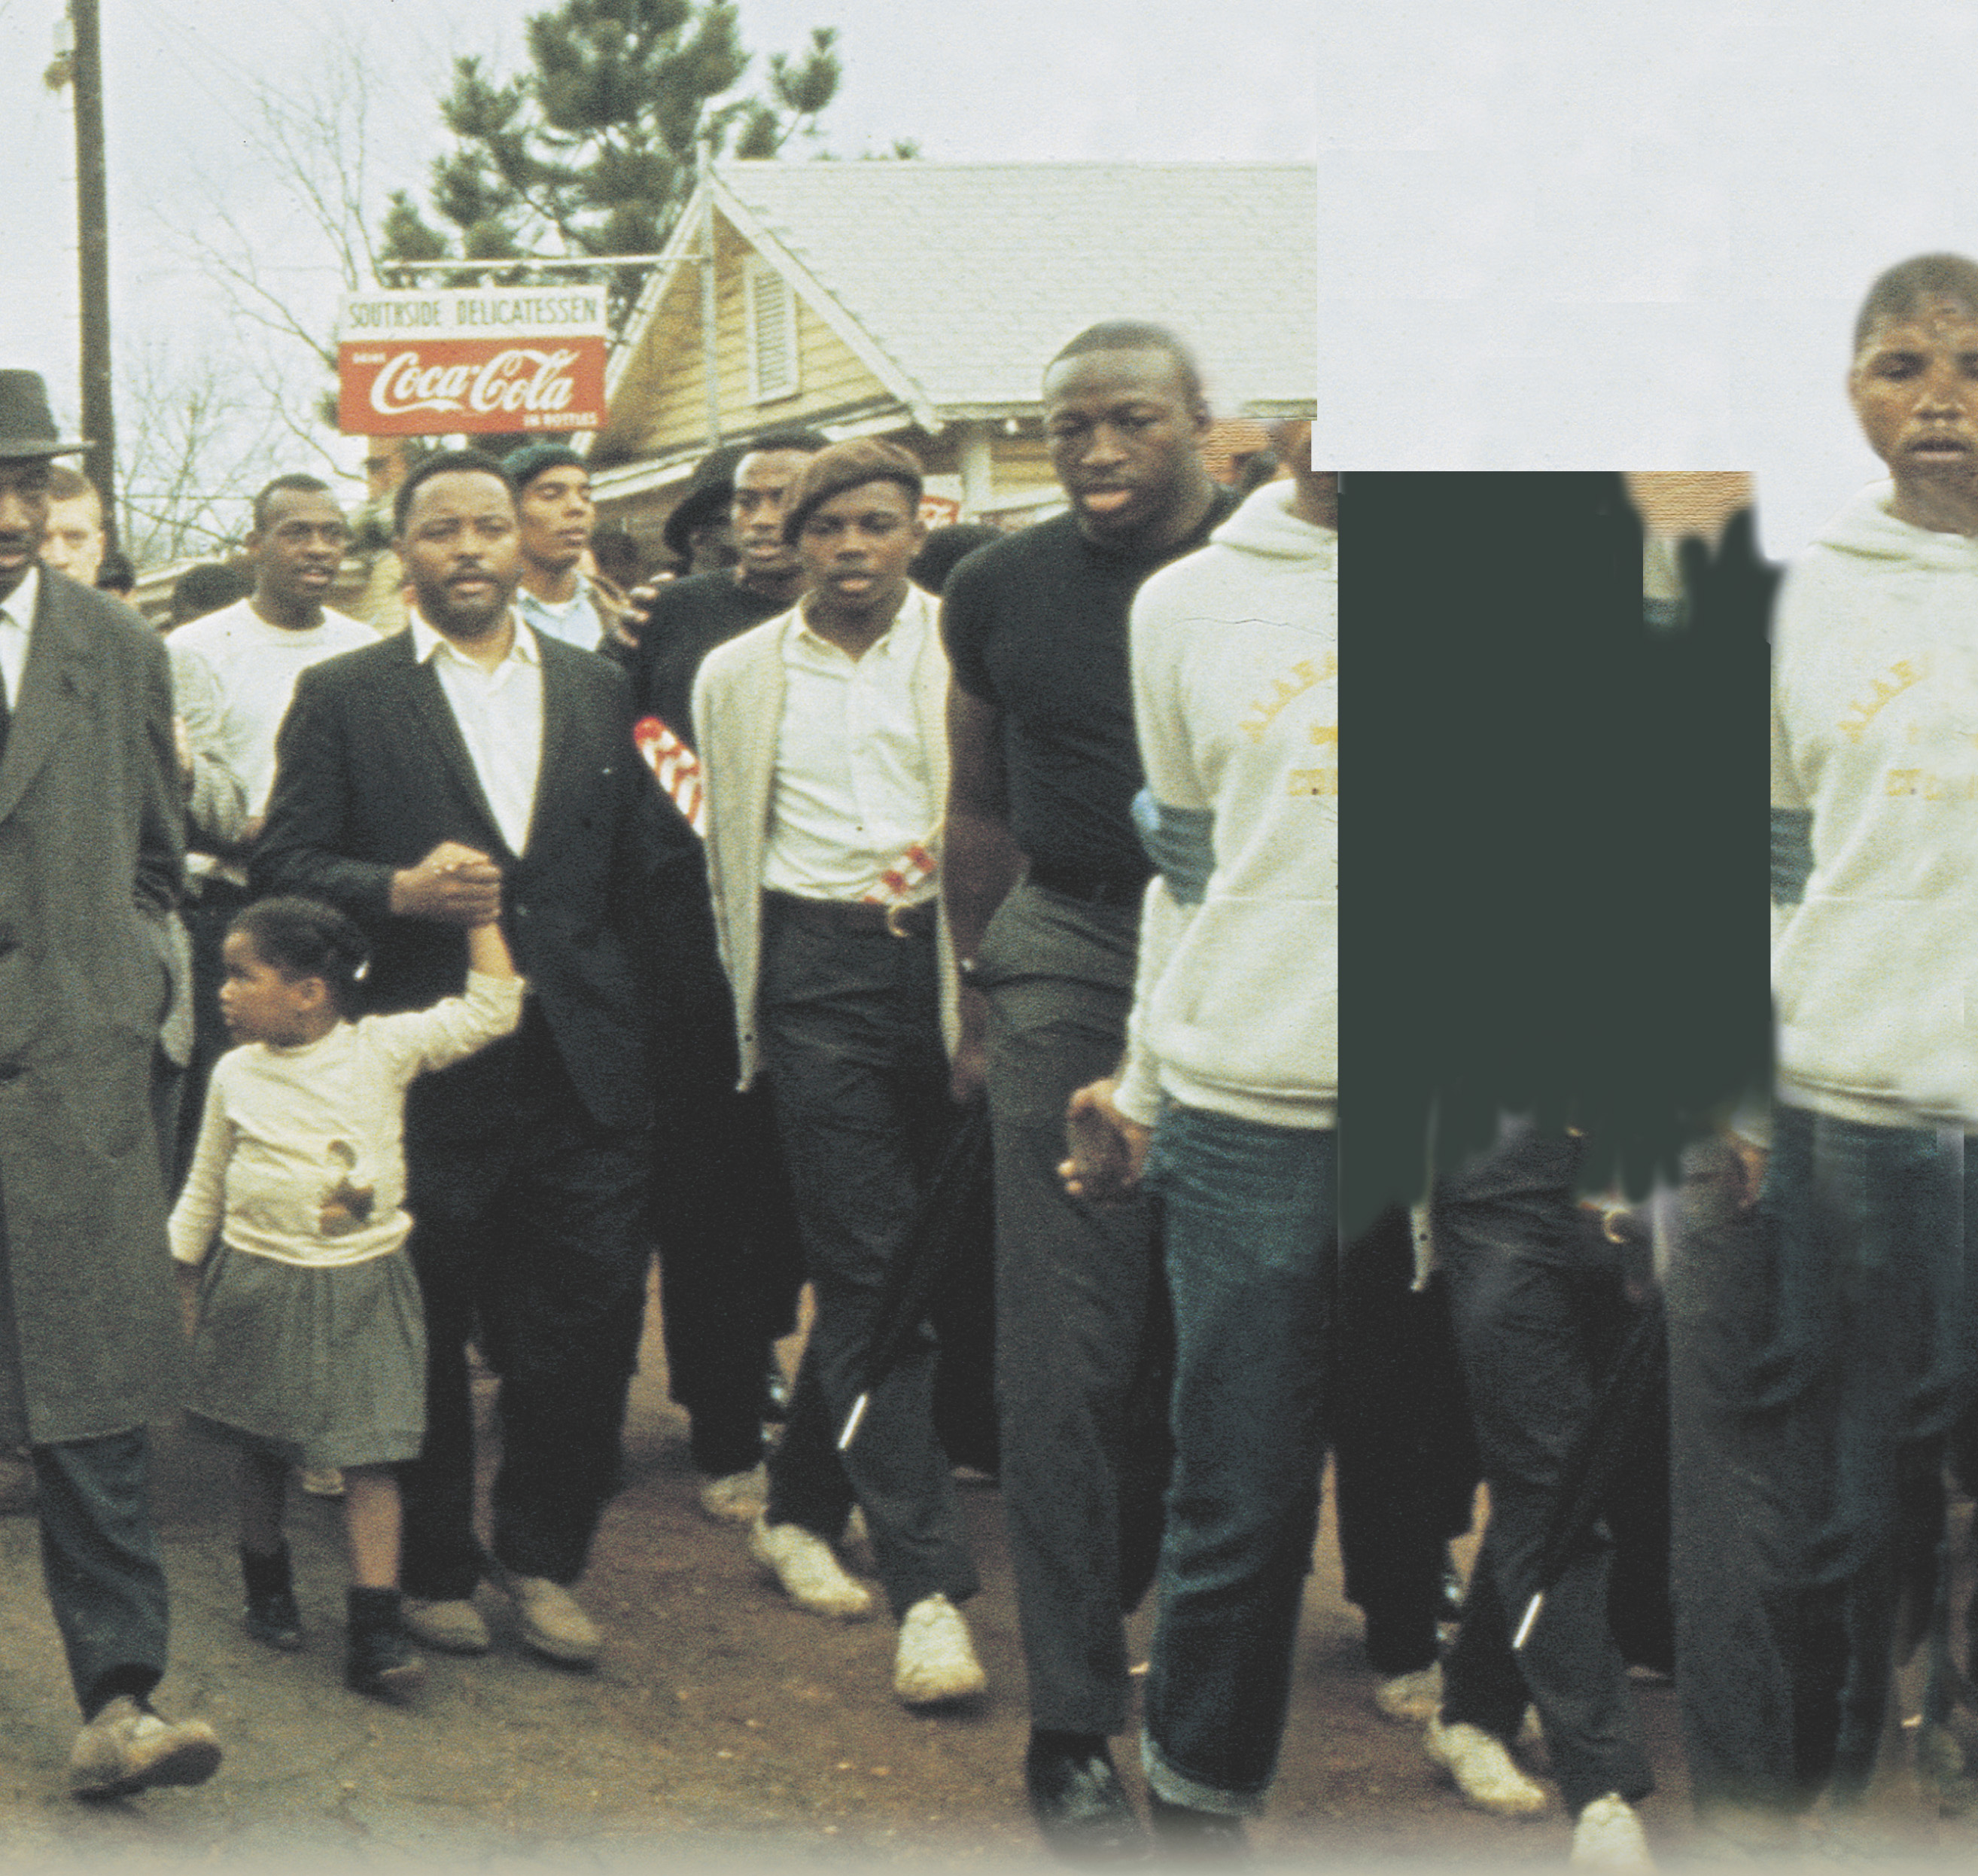 photo: Martin Luther King Jr. leads a crowd of marchers. Some carry American flags. A title: Civil Rights.